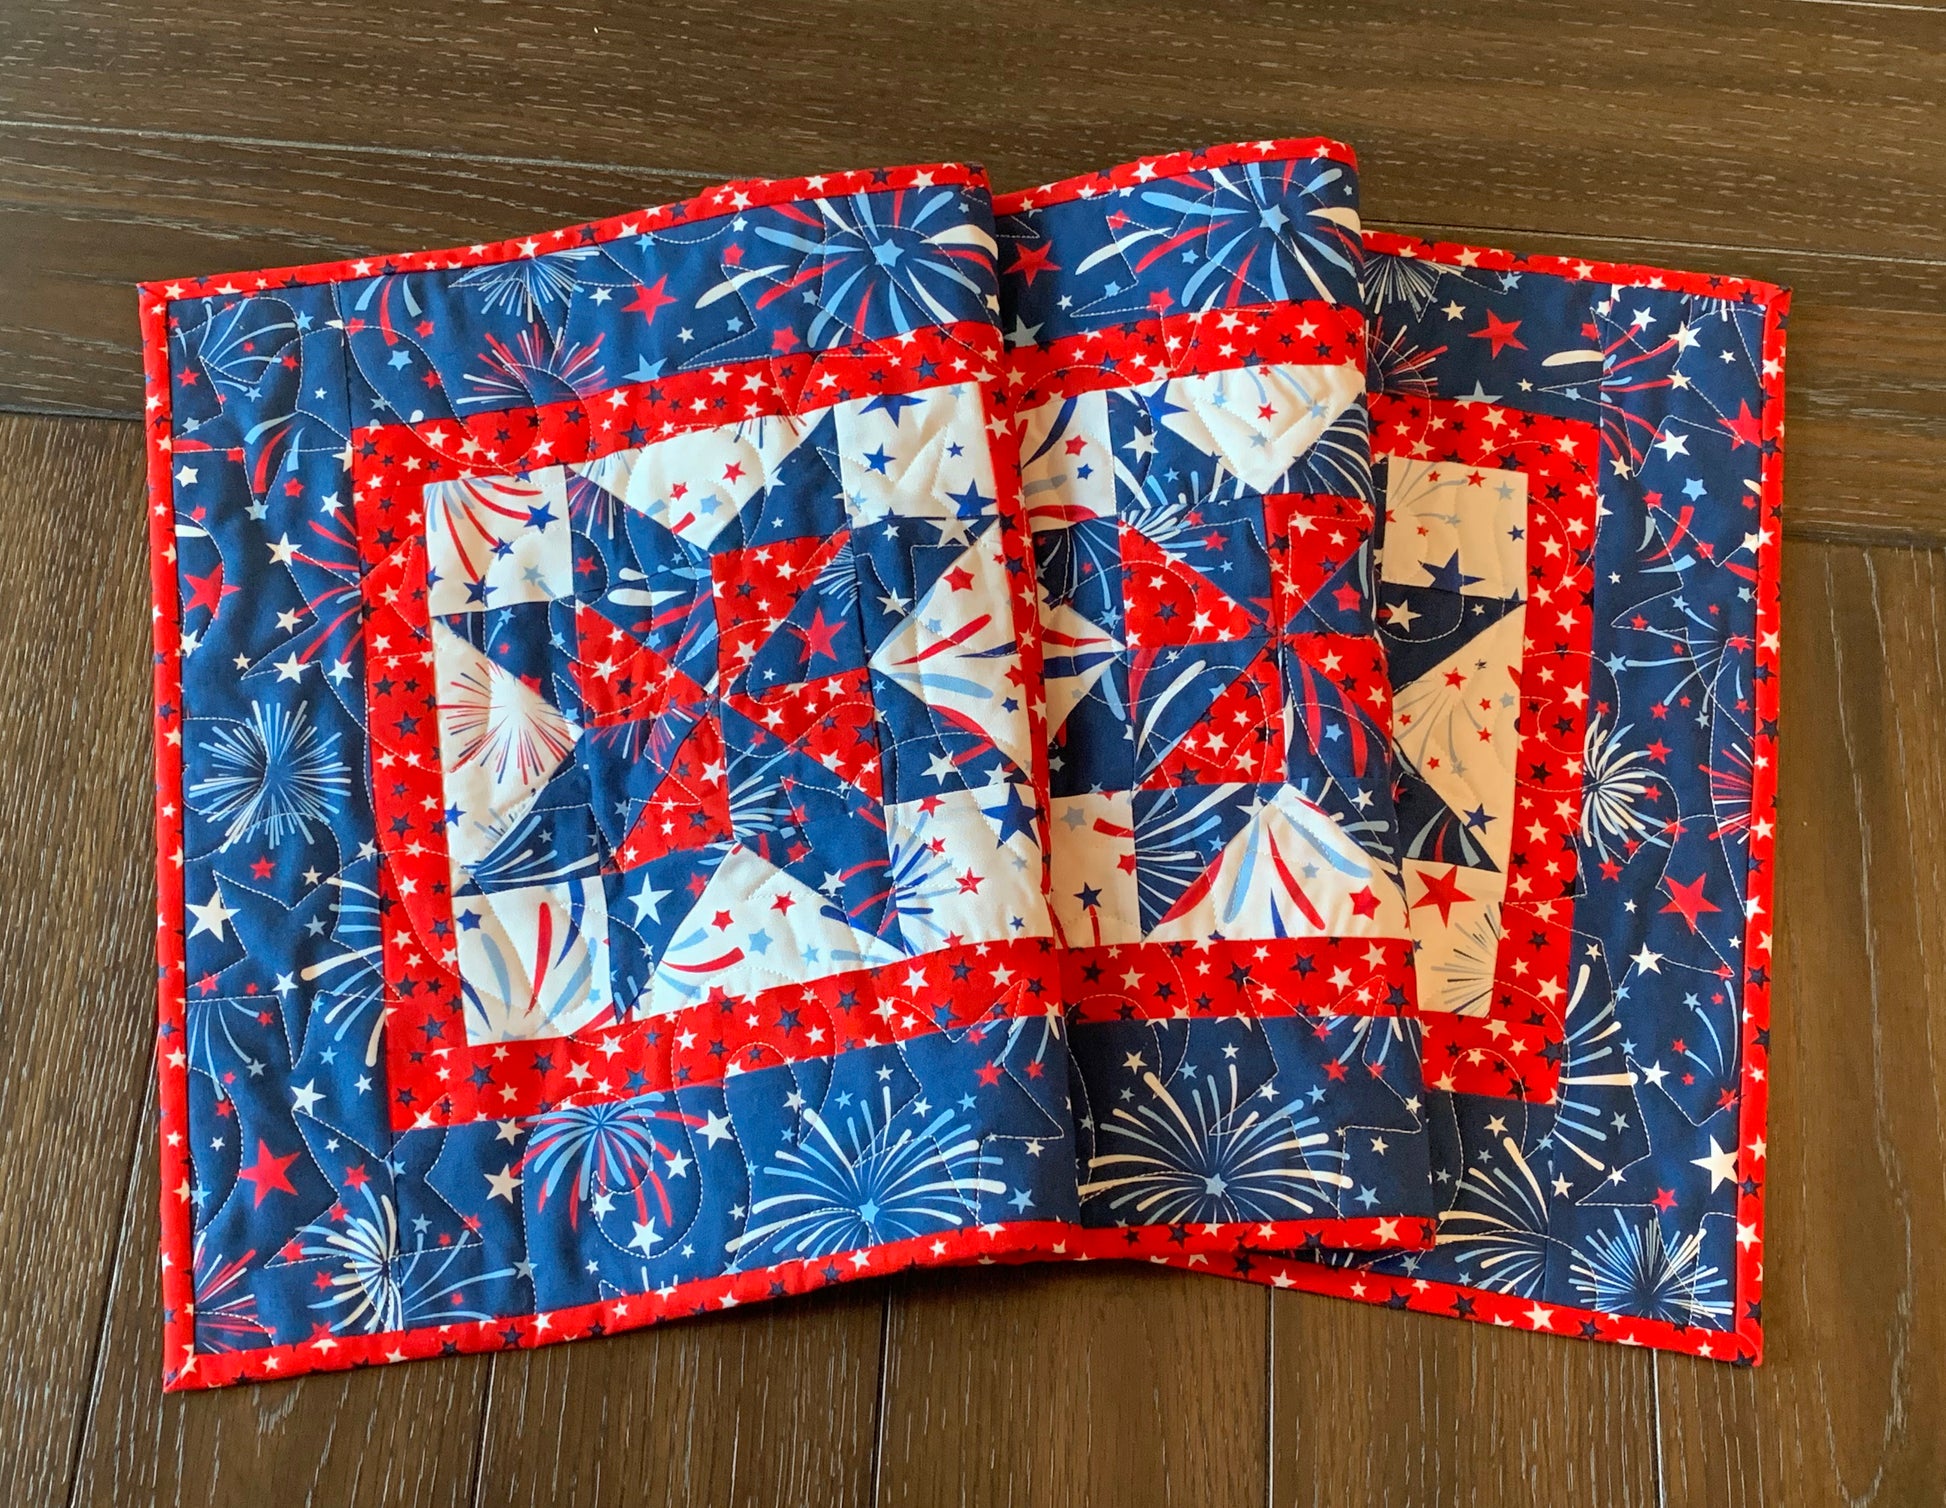 Red white and blue patriotic table runner with four center star blocks that have a pinwheel in the center. The runner has red star sashing between the blocks and a blue fireworks border. Runner is shown displayed on a table.